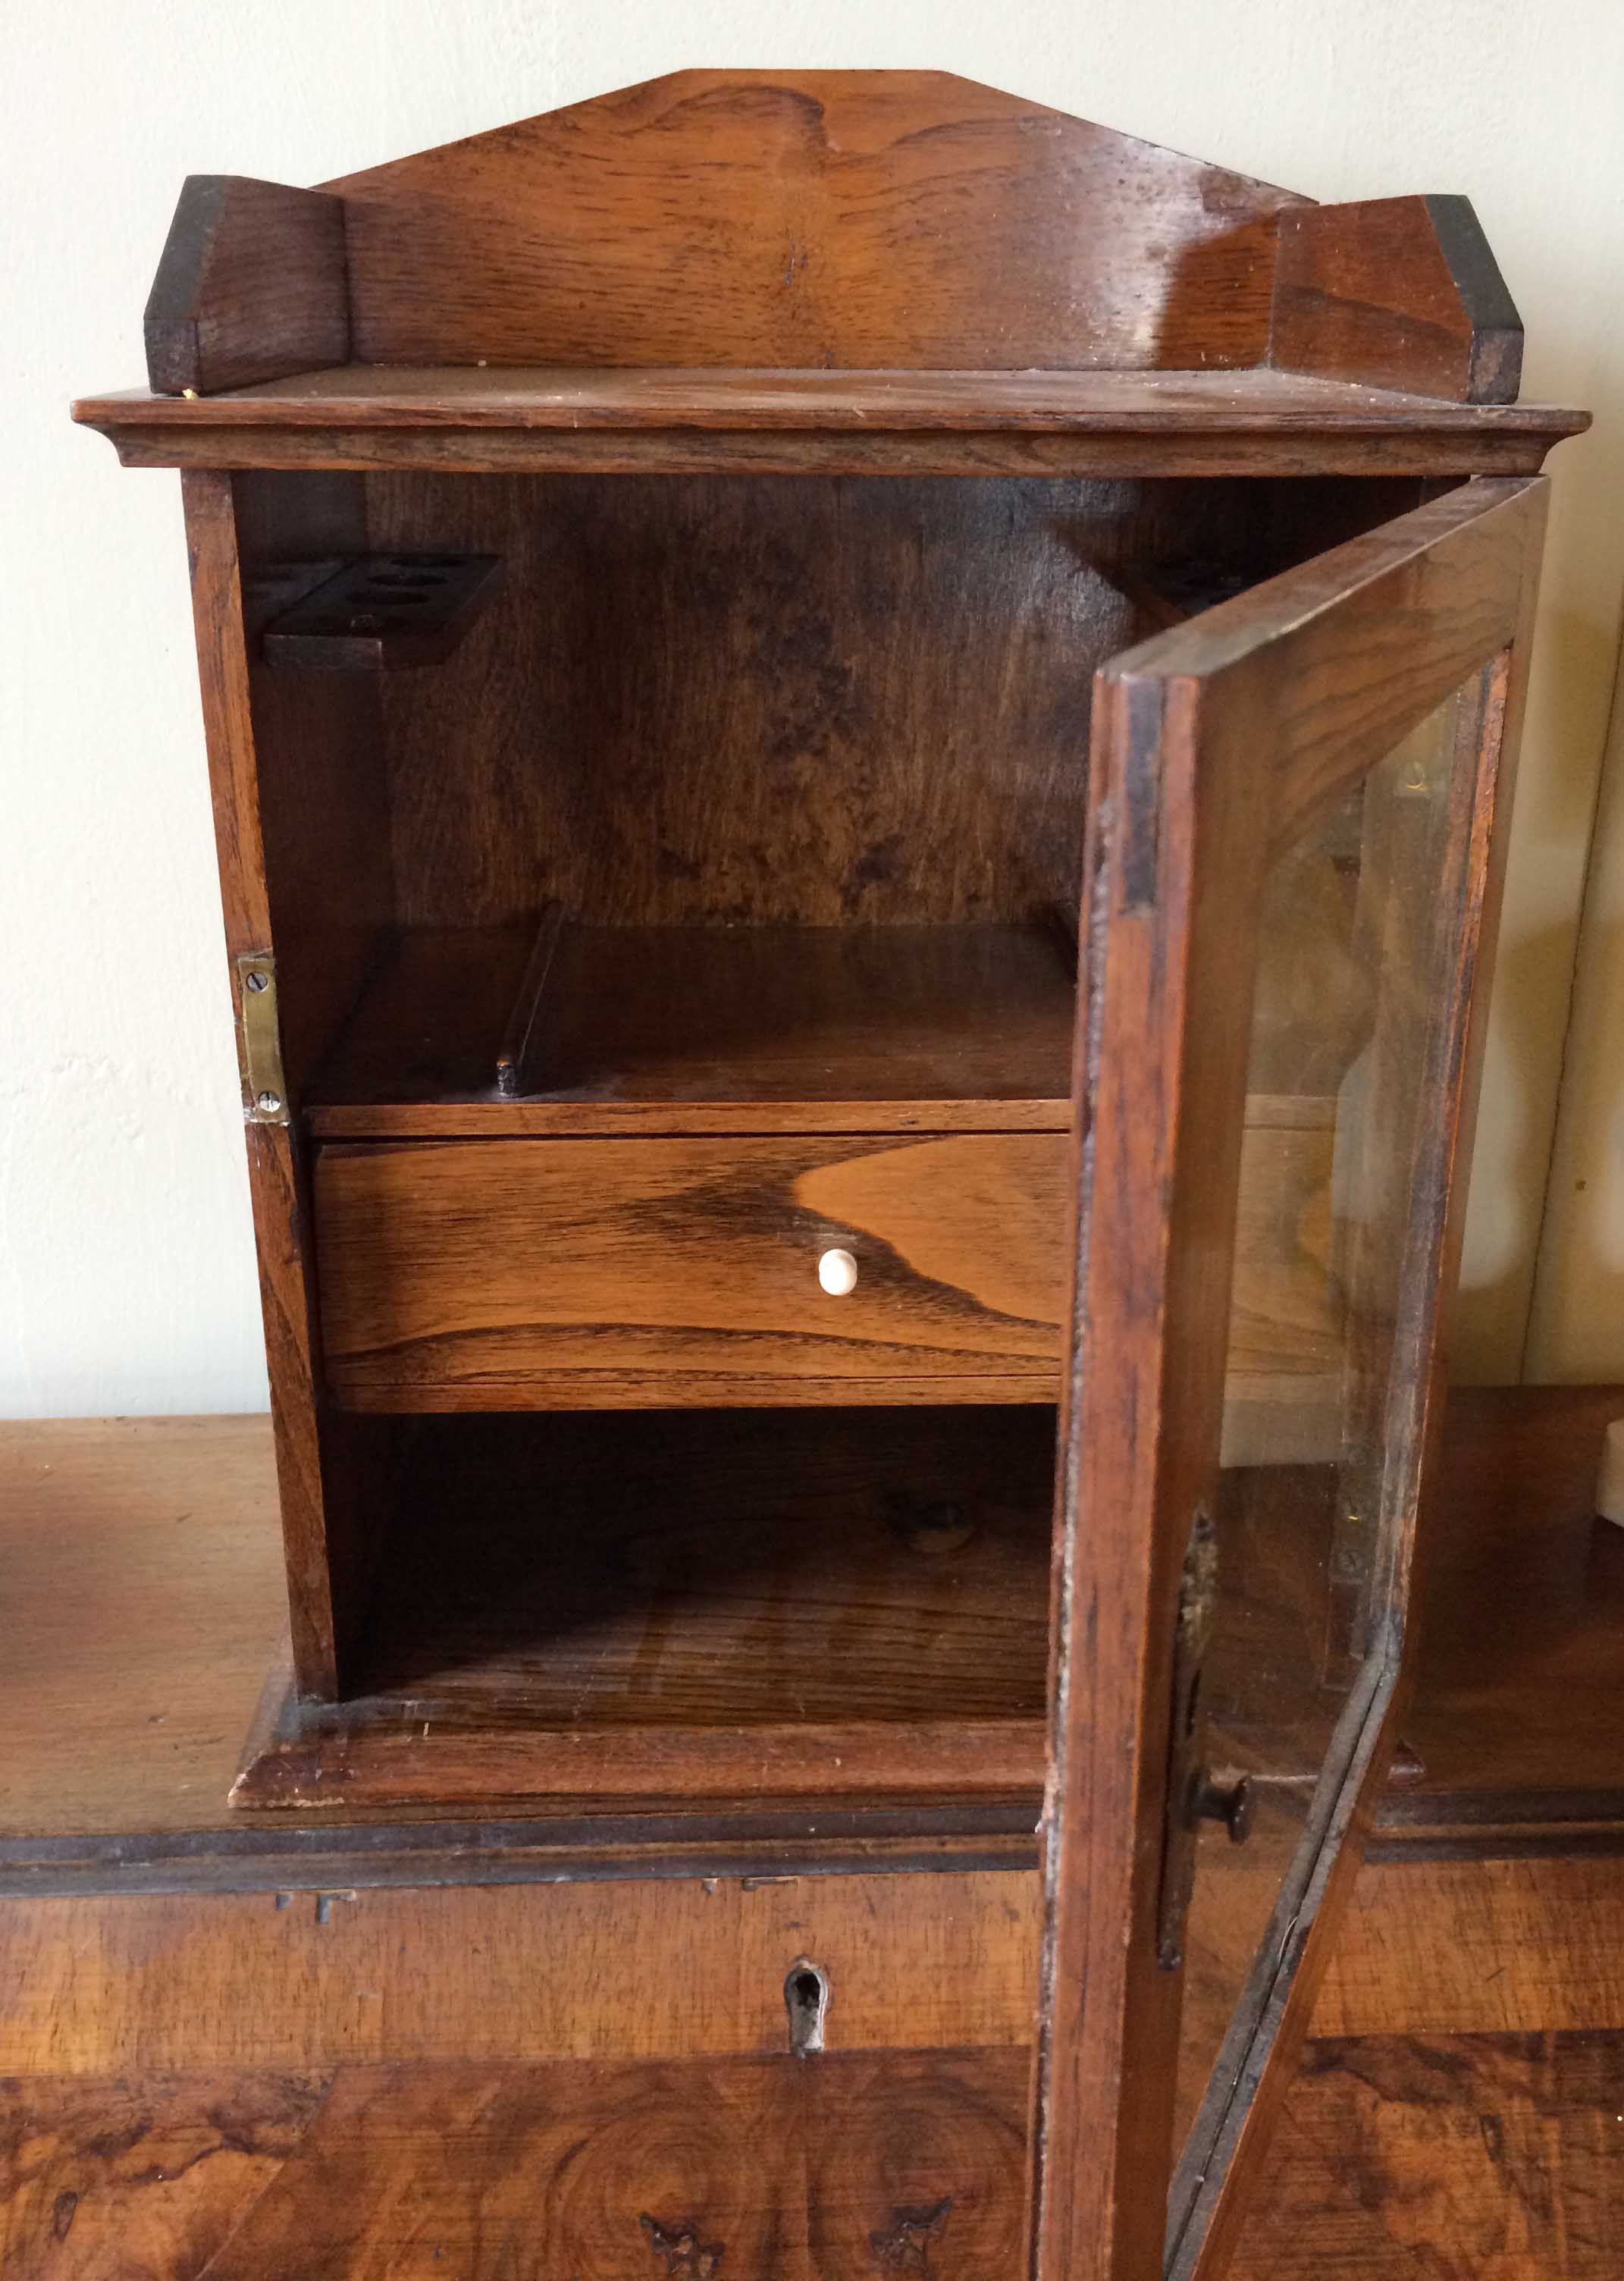 Edwardian Oak smokers cabinet, with glass door, pipe racks and single drawer.